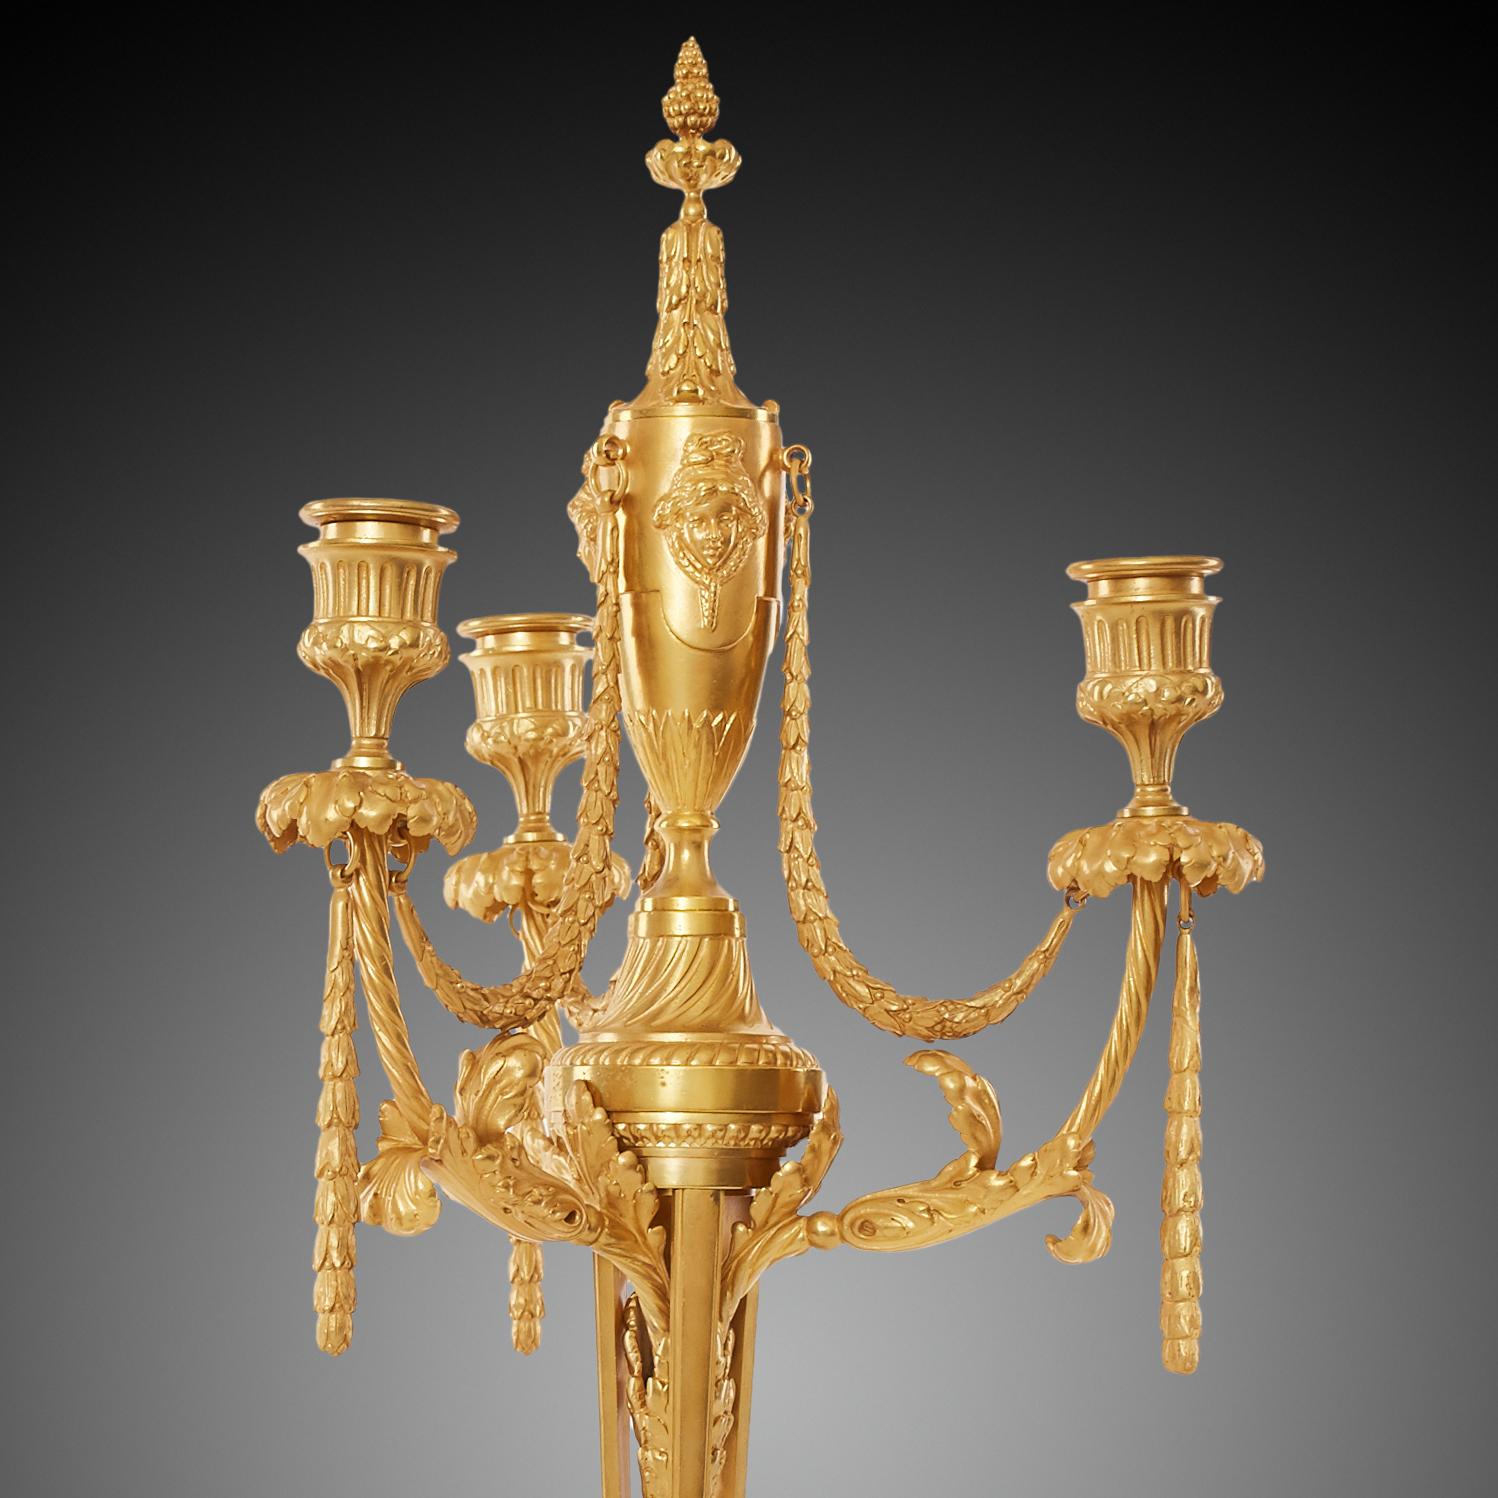 These large and finely cast candelabrum were made by the well respected bronzier Ferdinand Barbedienne. They are truly exceptional examples of 19th century French craftsmanship. They are decorated in the Louis XVI style and each with three-light